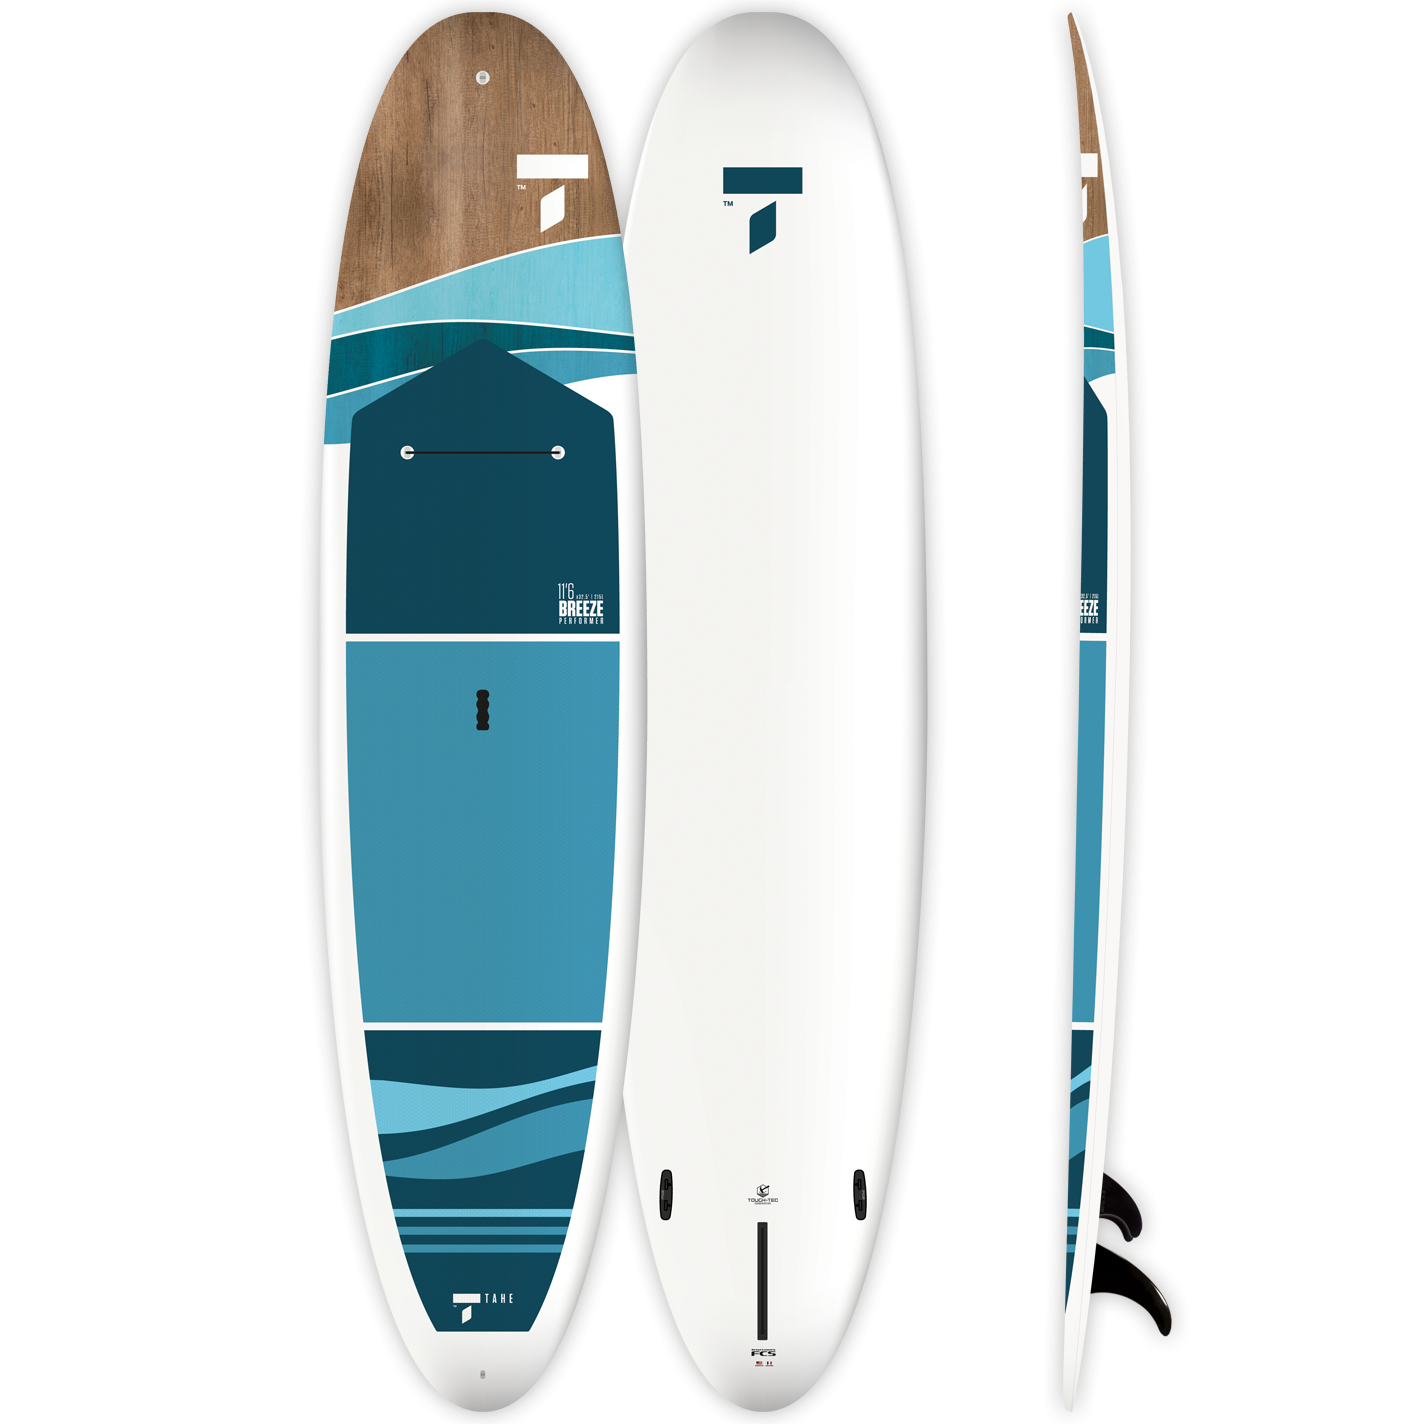 11'6" Breeze Performer SUP Paddleboard